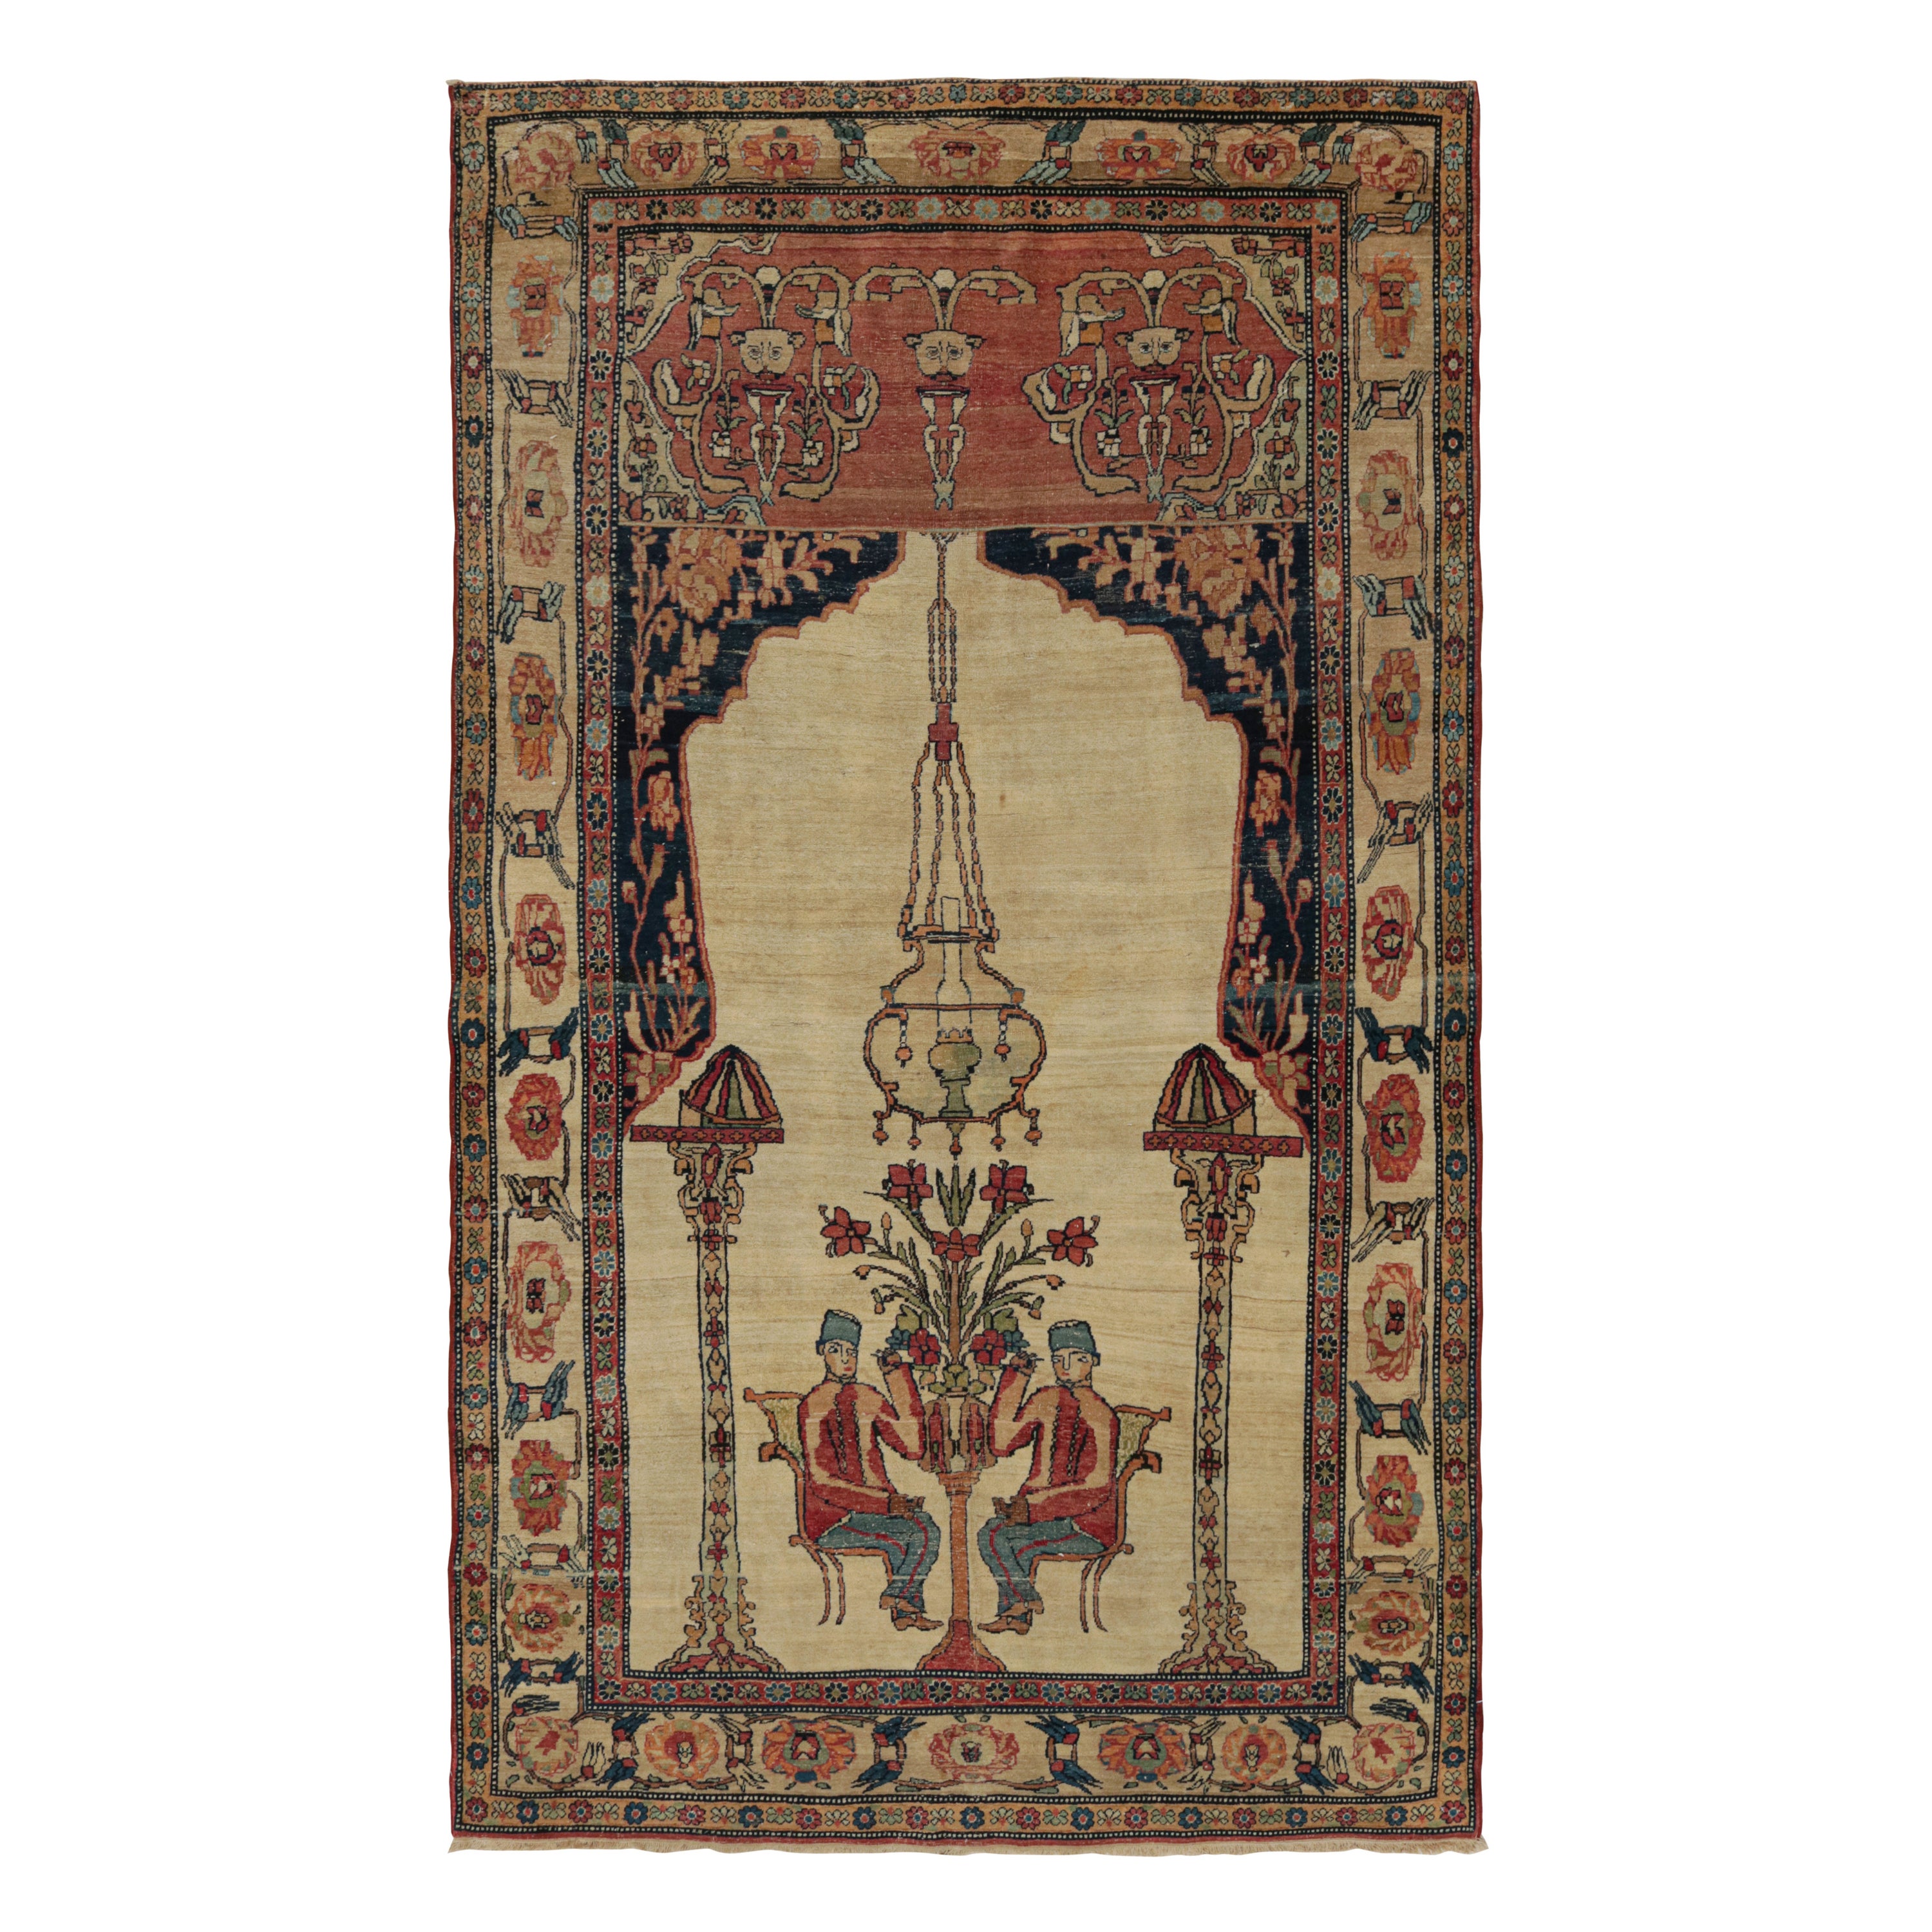 Antique Persian Kerman Lavar Rug in Beige with Pictorials, from Rug & Kilim